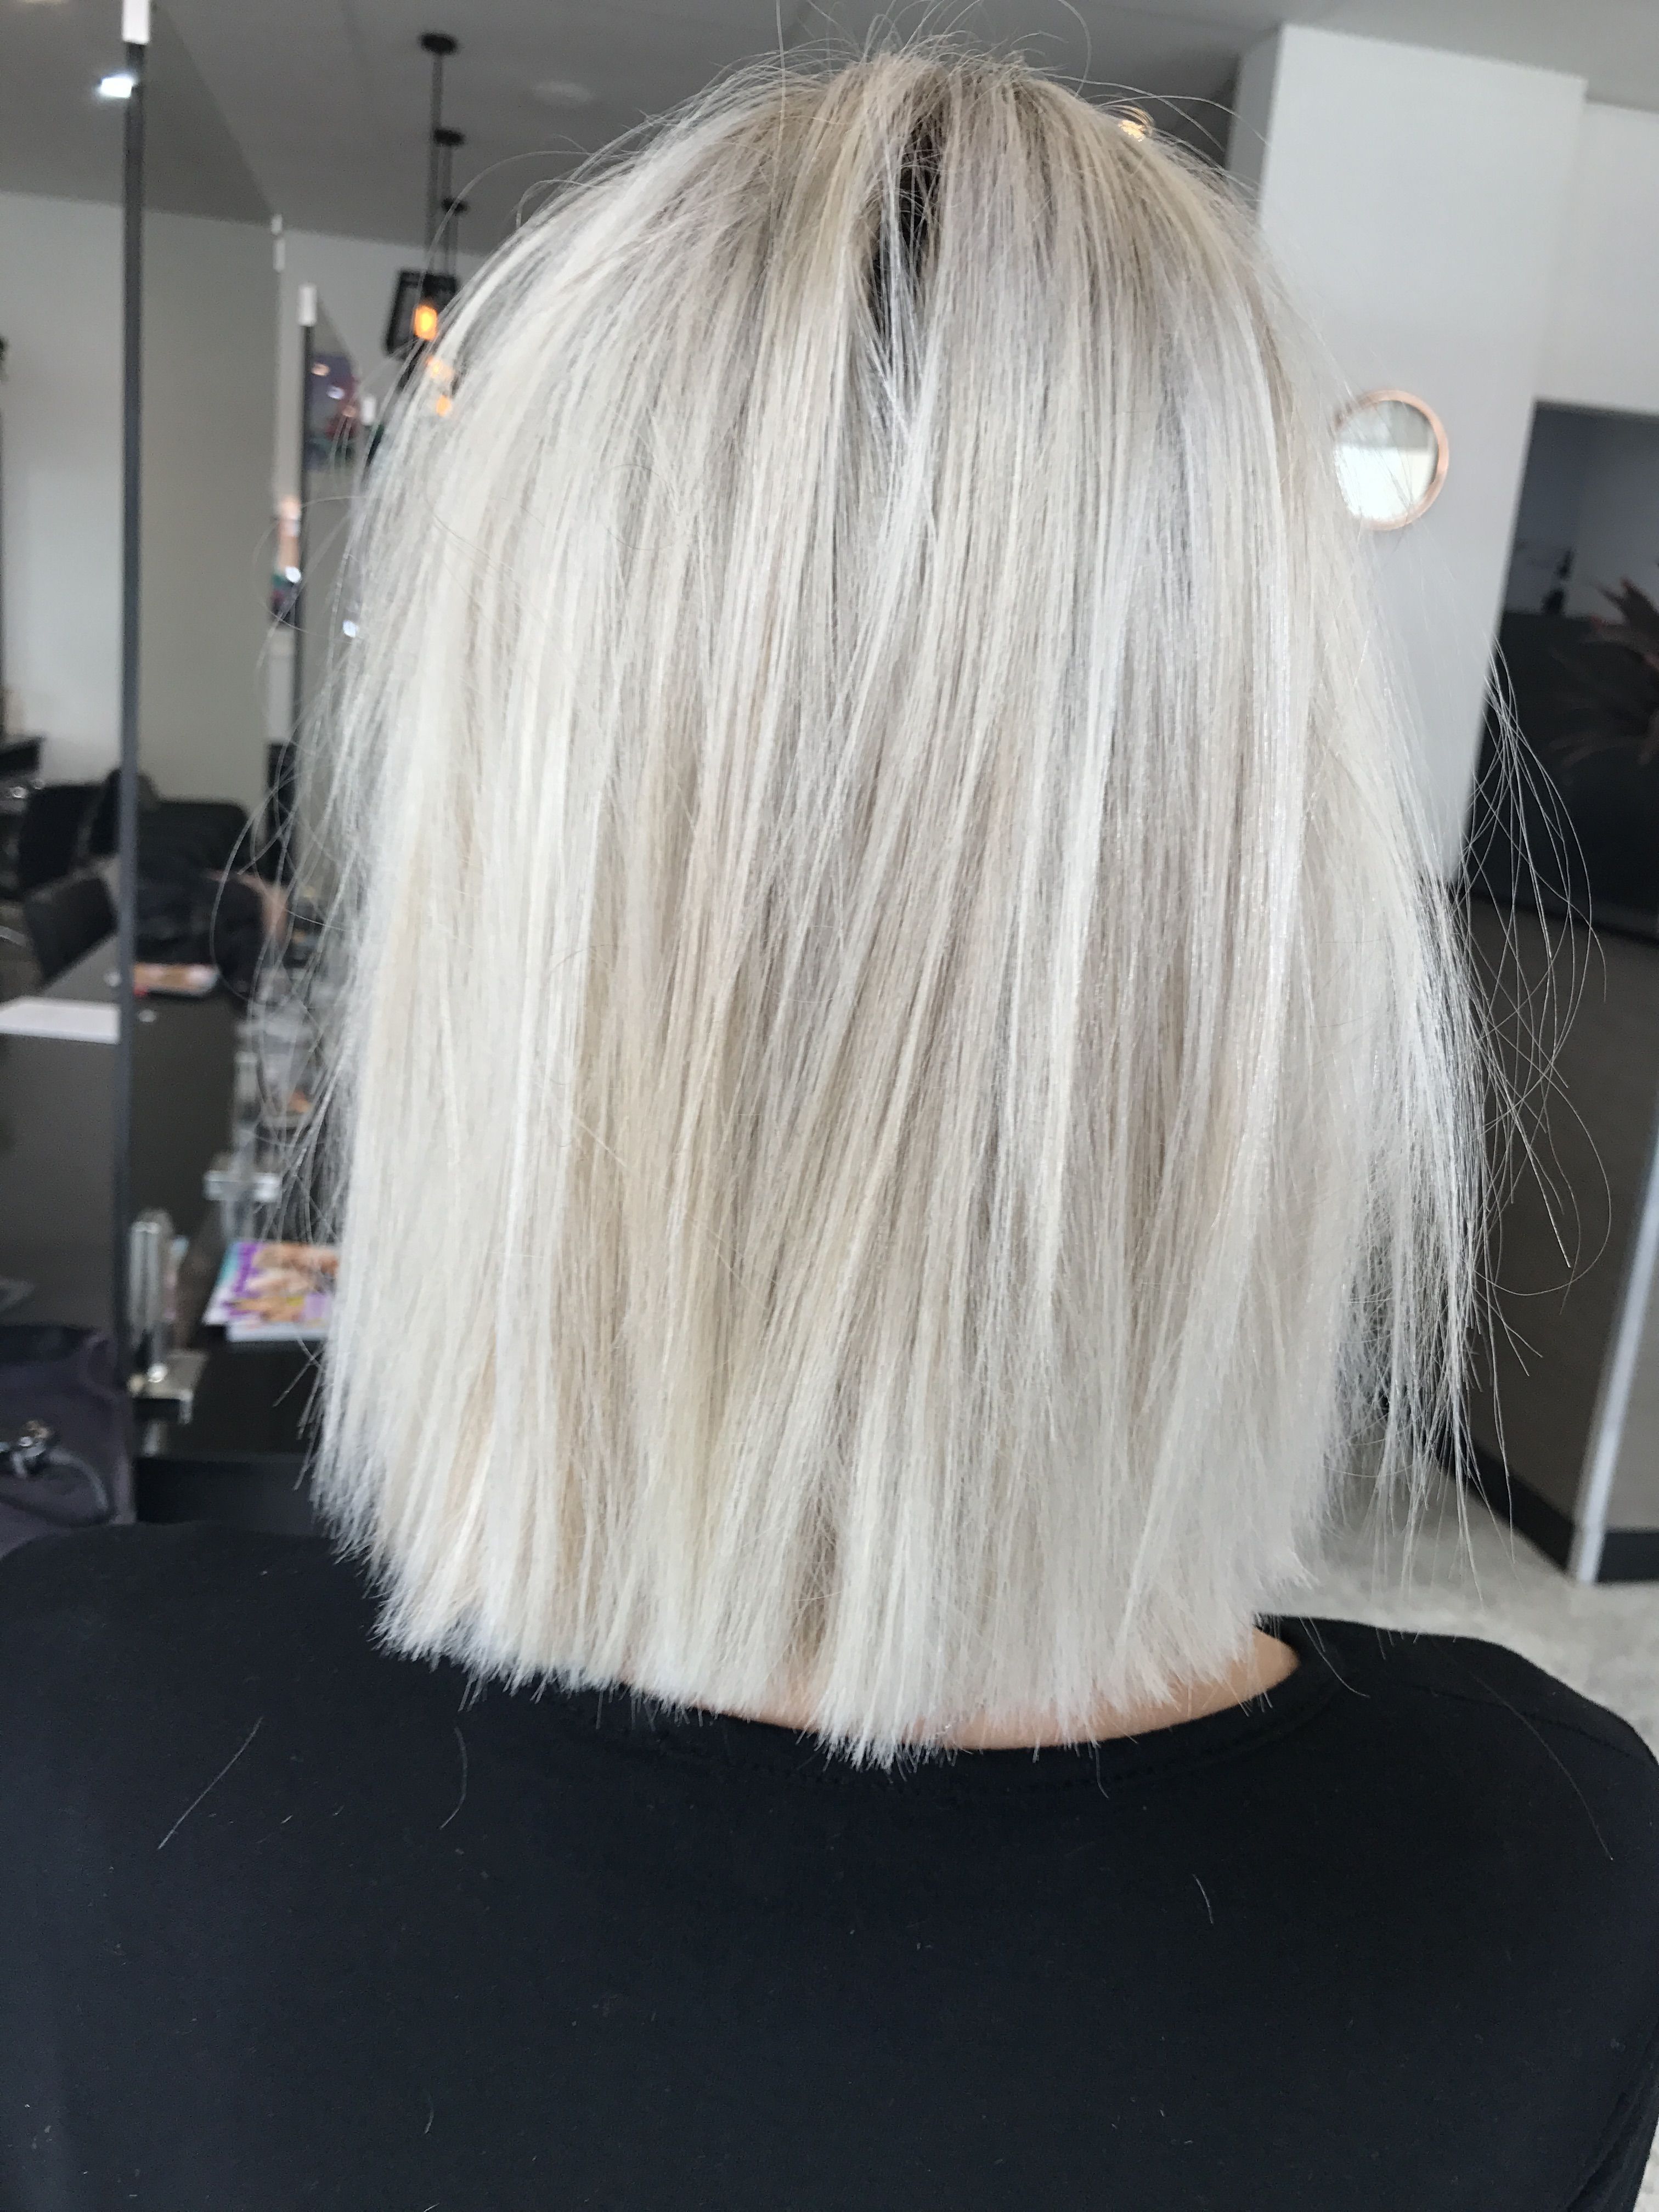 Blonde Hair Short Lob Textured Straight Hair Cut Colour Cool Ash Pertaining To Newest Ash Blonde Half Up Hairstyles (View 12 of 20)